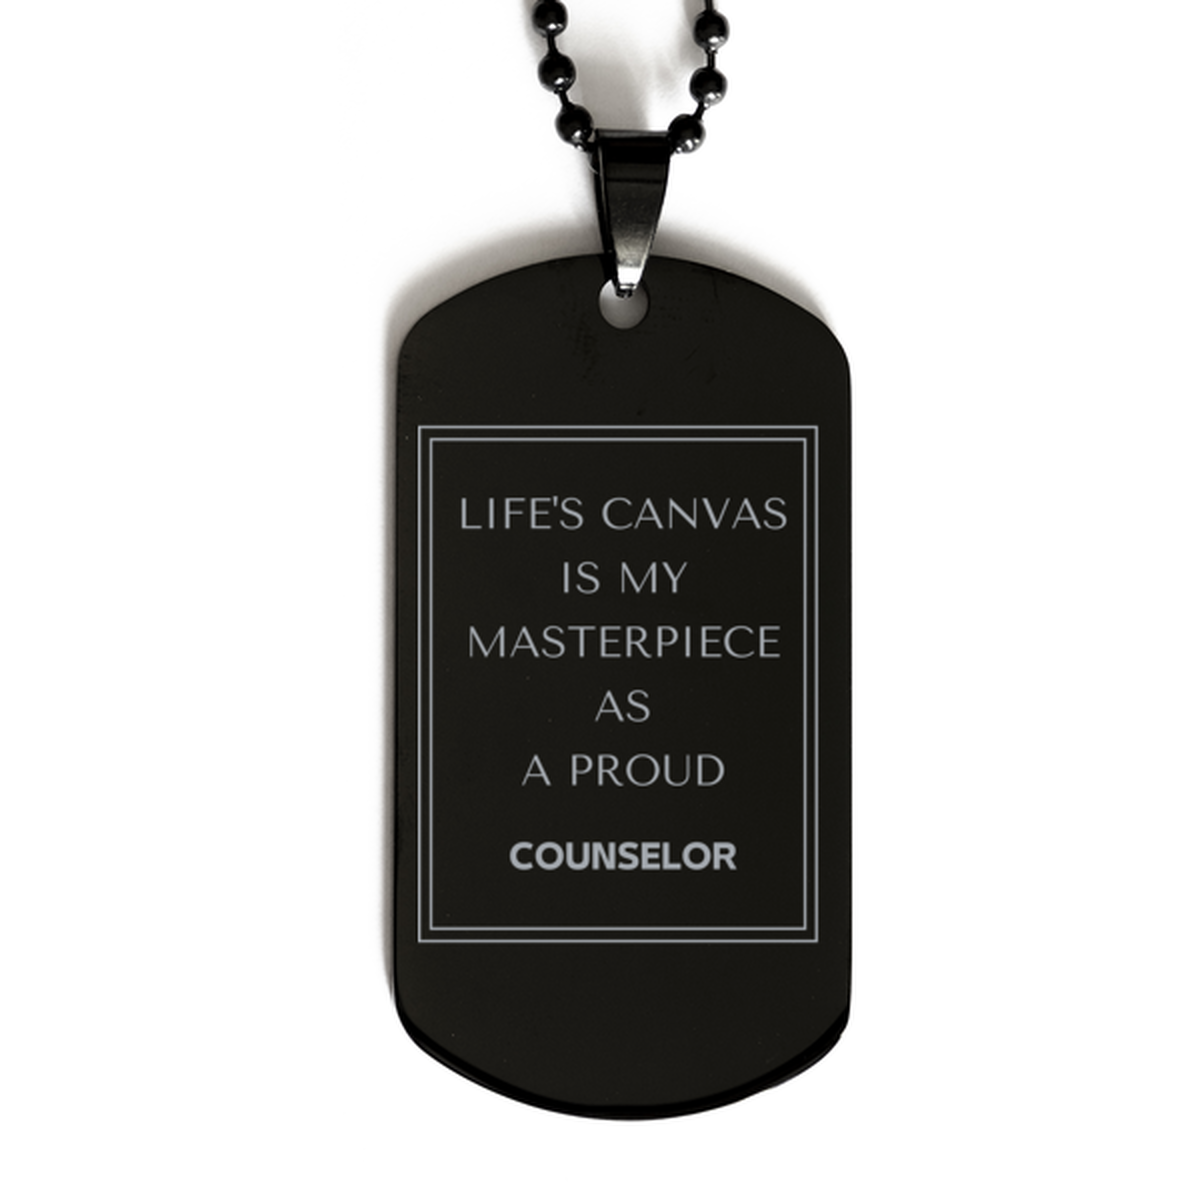 Proud Counselor Gifts, Life's canvas is my masterpiece, Epic Birthday Christmas Unique Black Dog Tag For Counselor, Coworkers, Men, Women, Friends